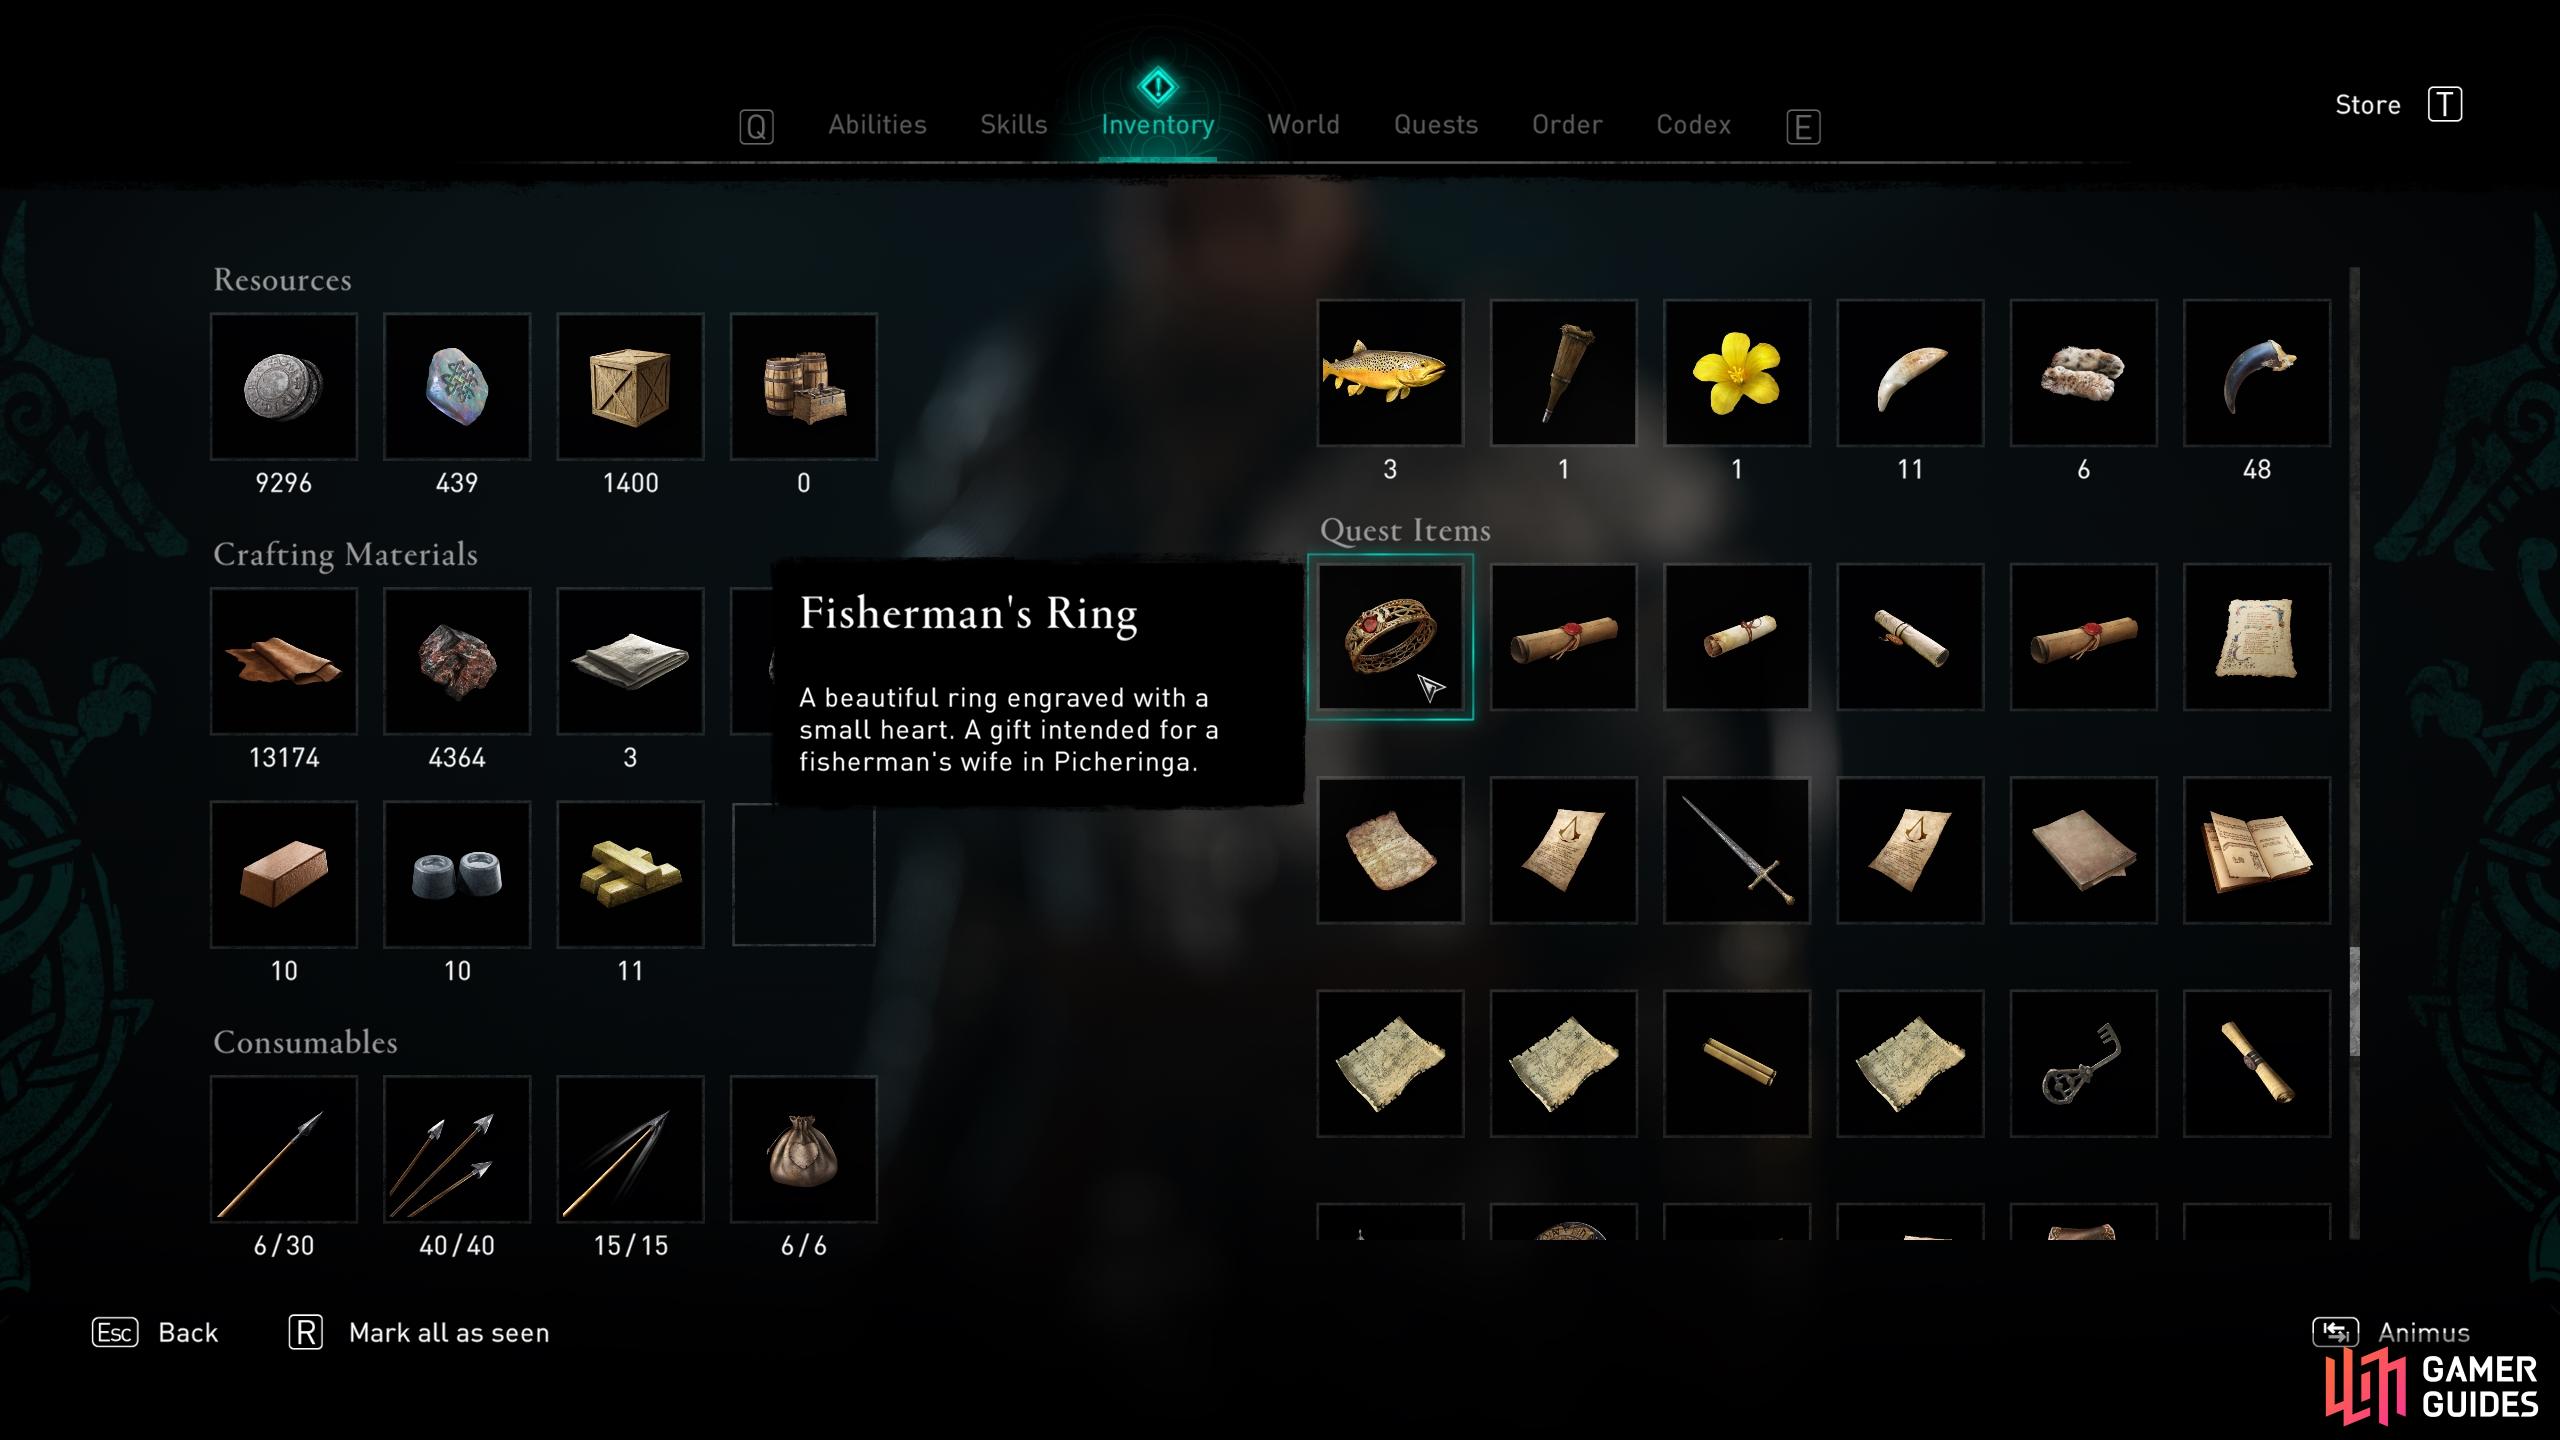 After reading the note you'll have the Fisherman's Ring in your inventory.